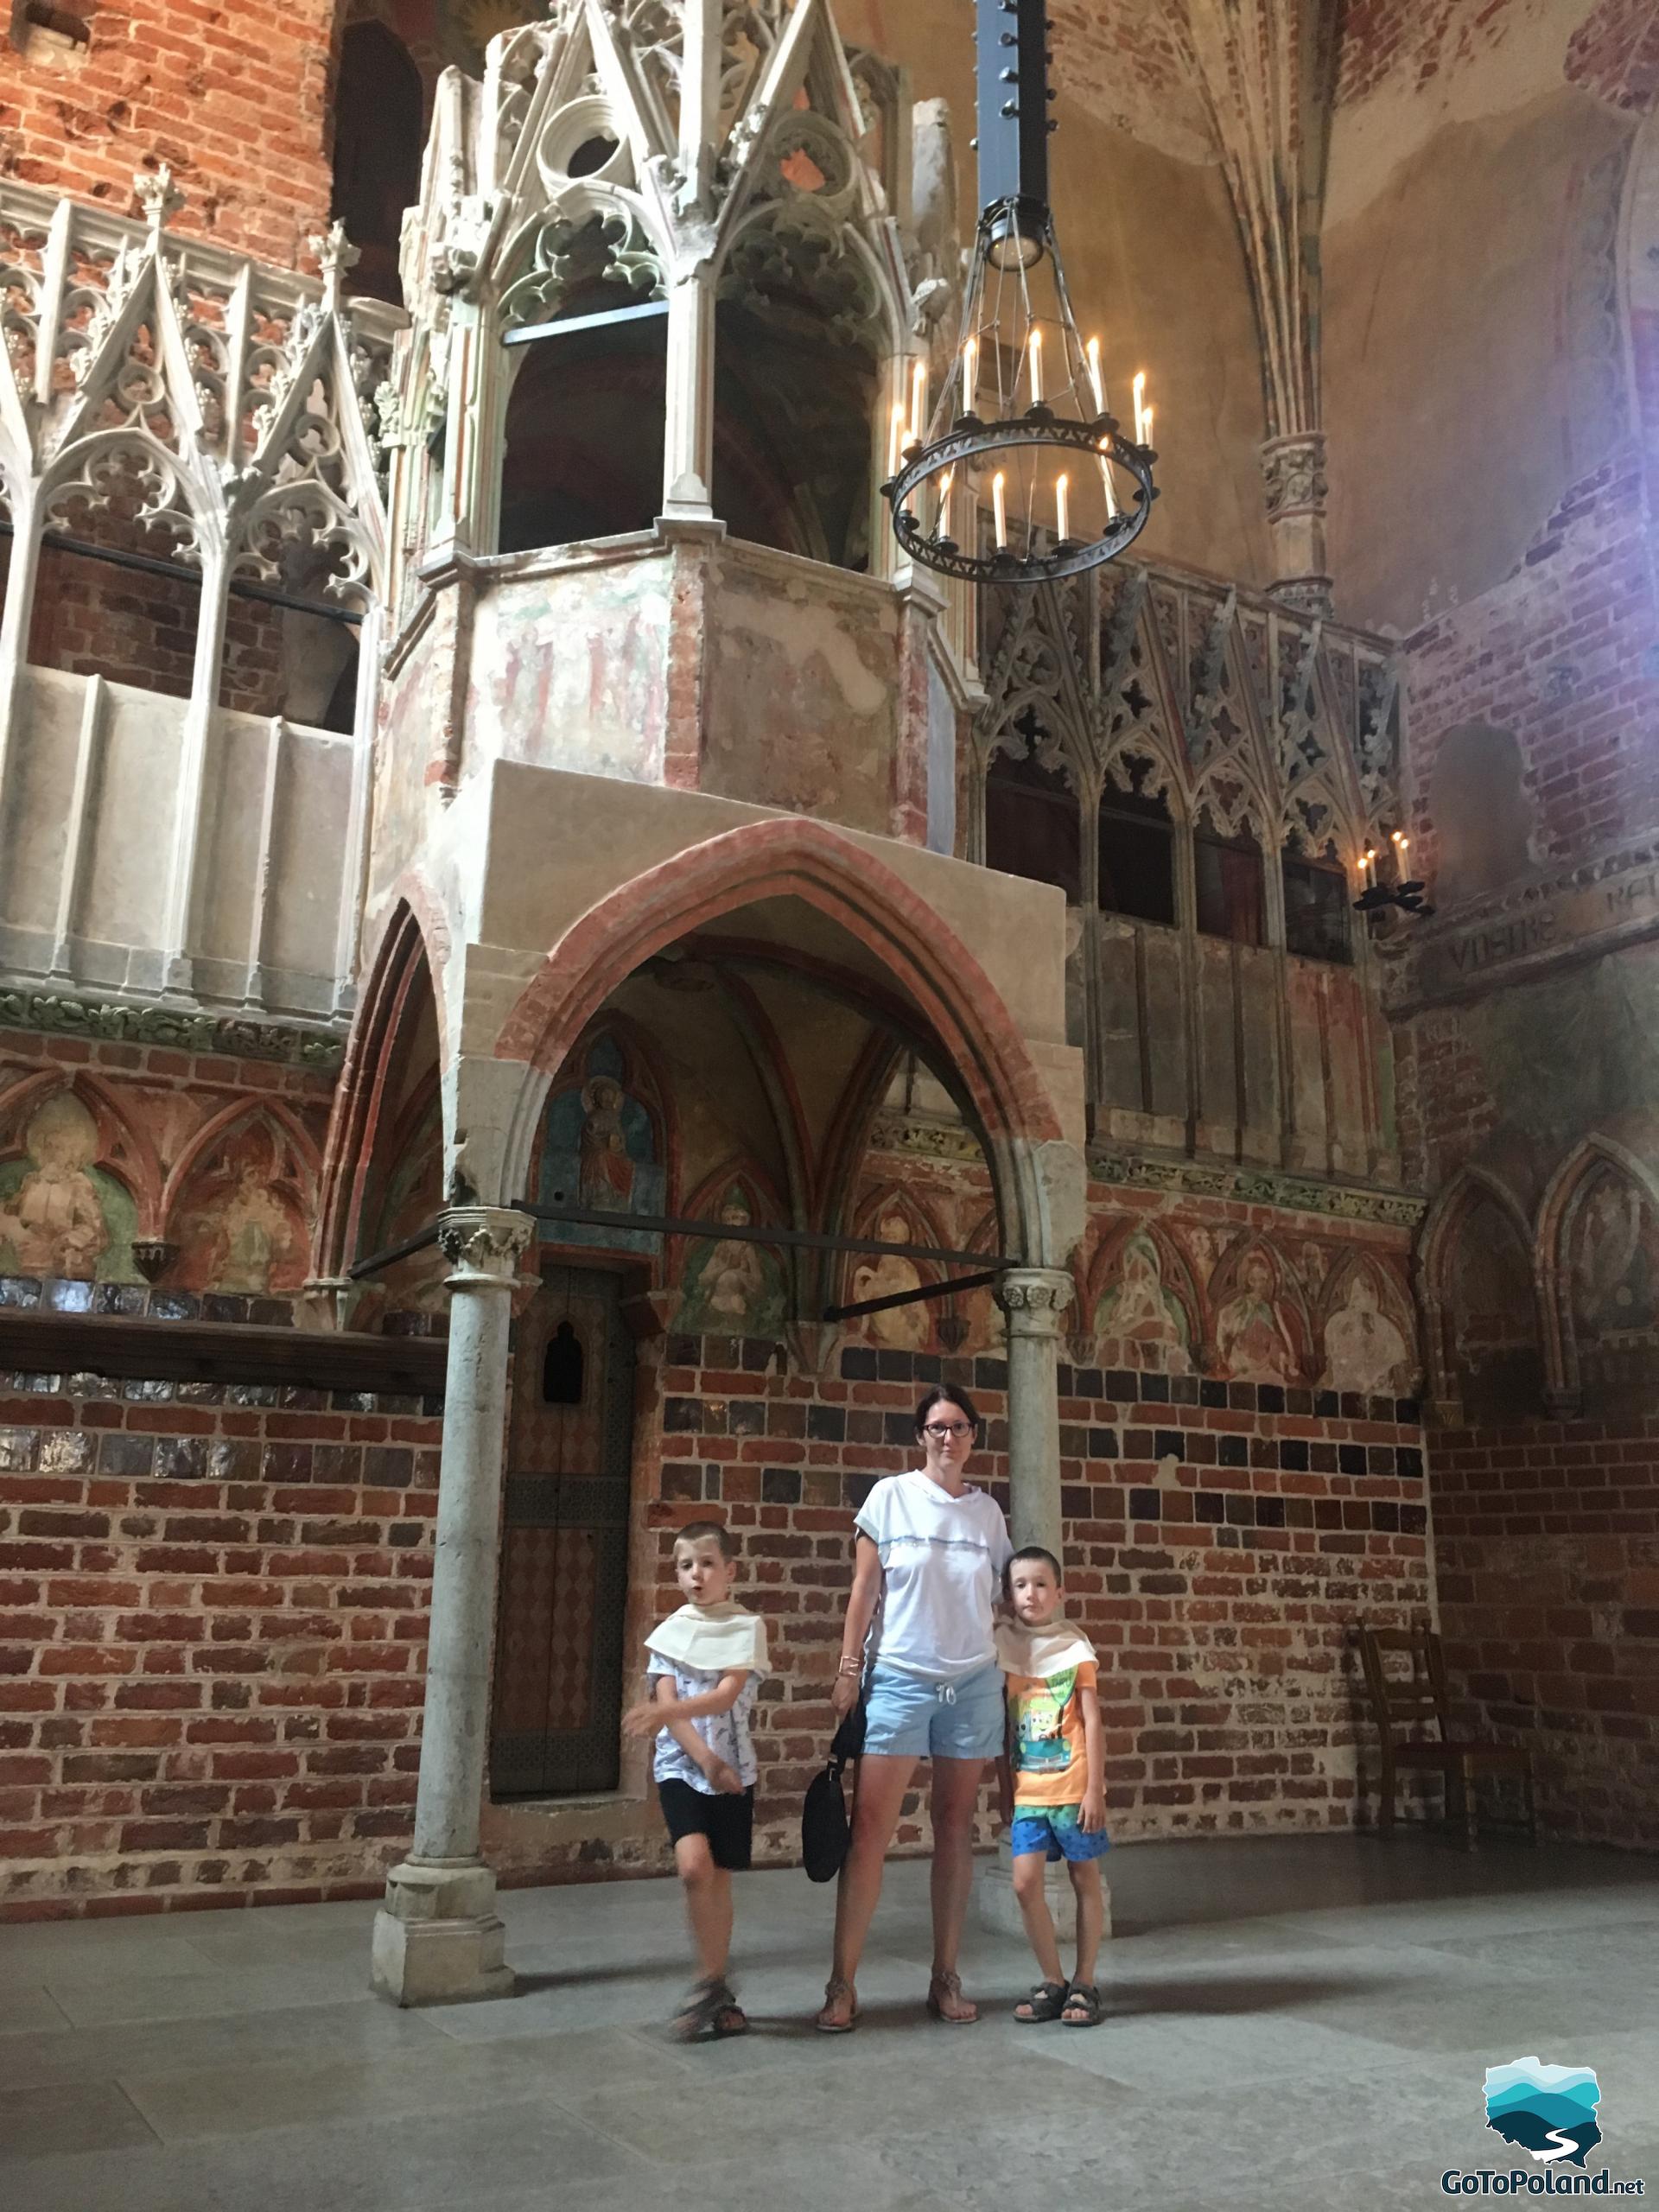 two boys and a woman are standing in a church of the castle